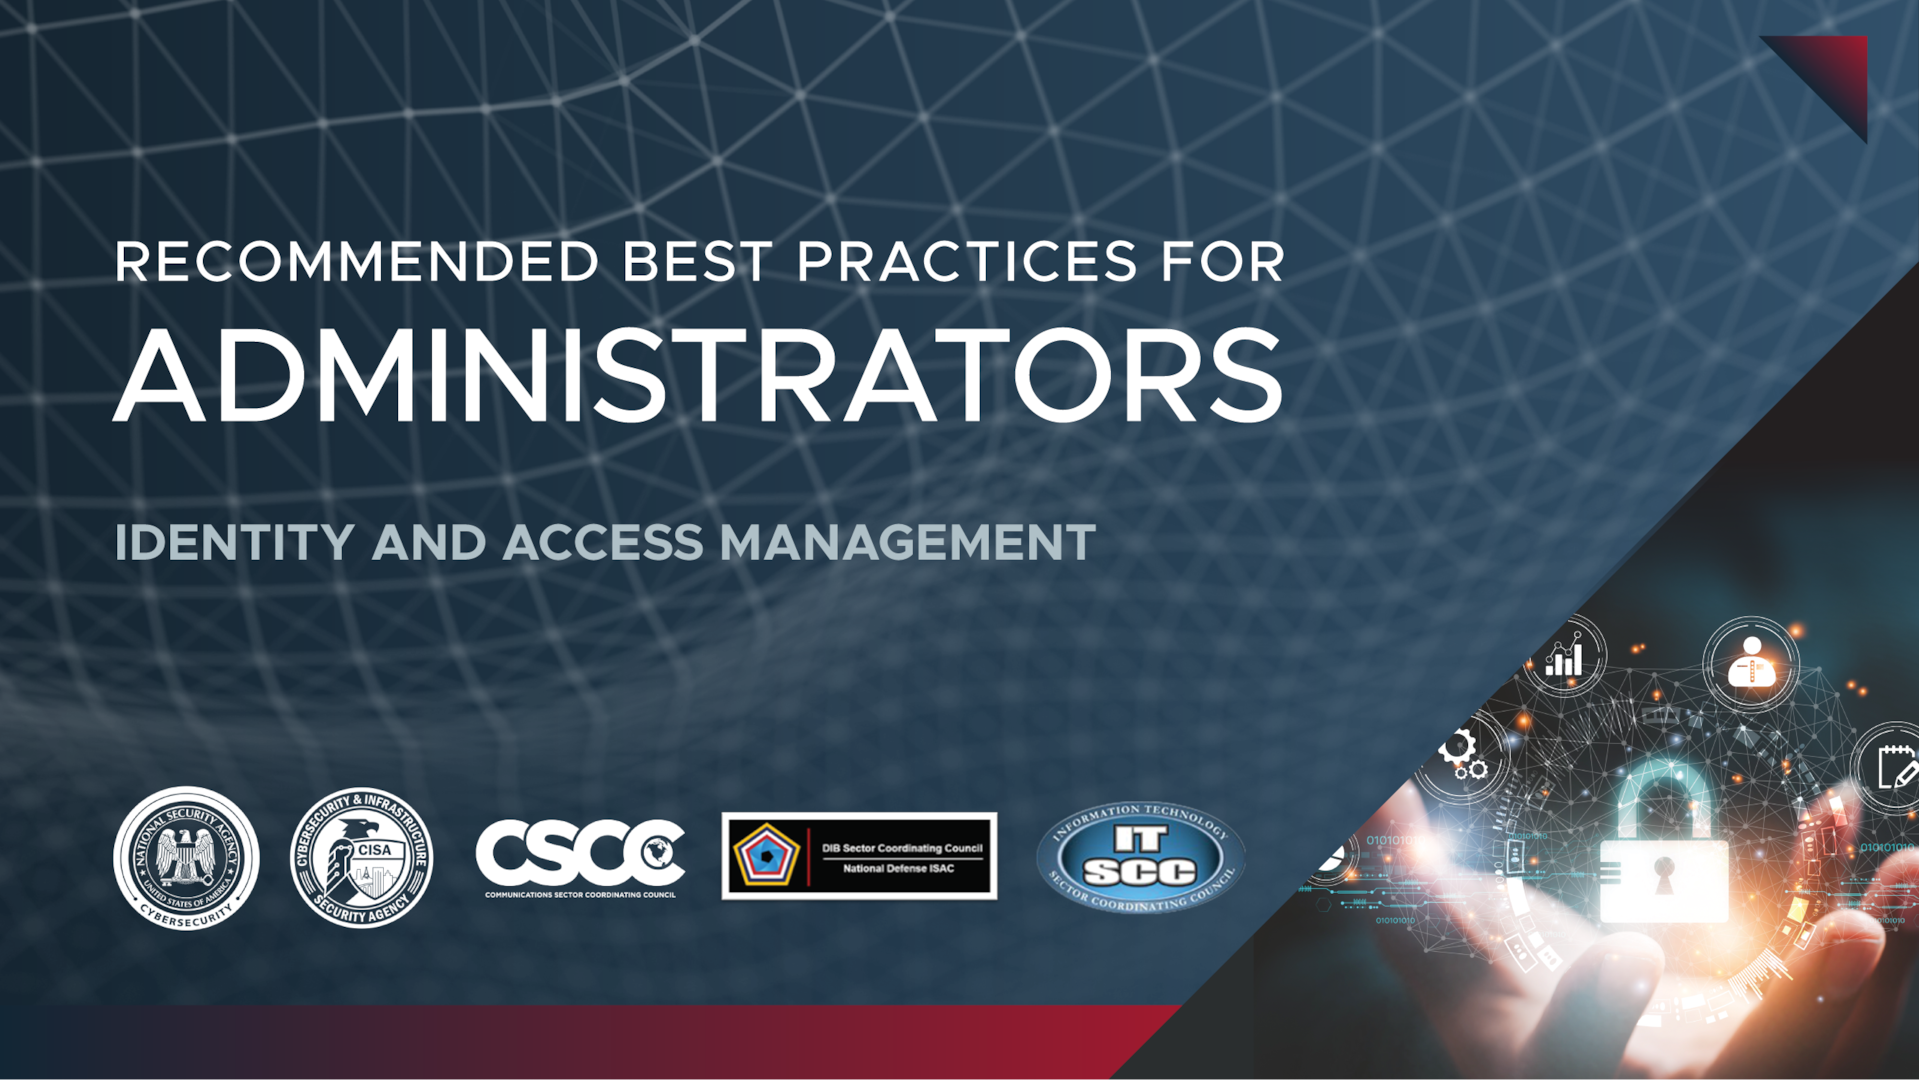 Identity and Access Management Recommended Best Practices for Administrators